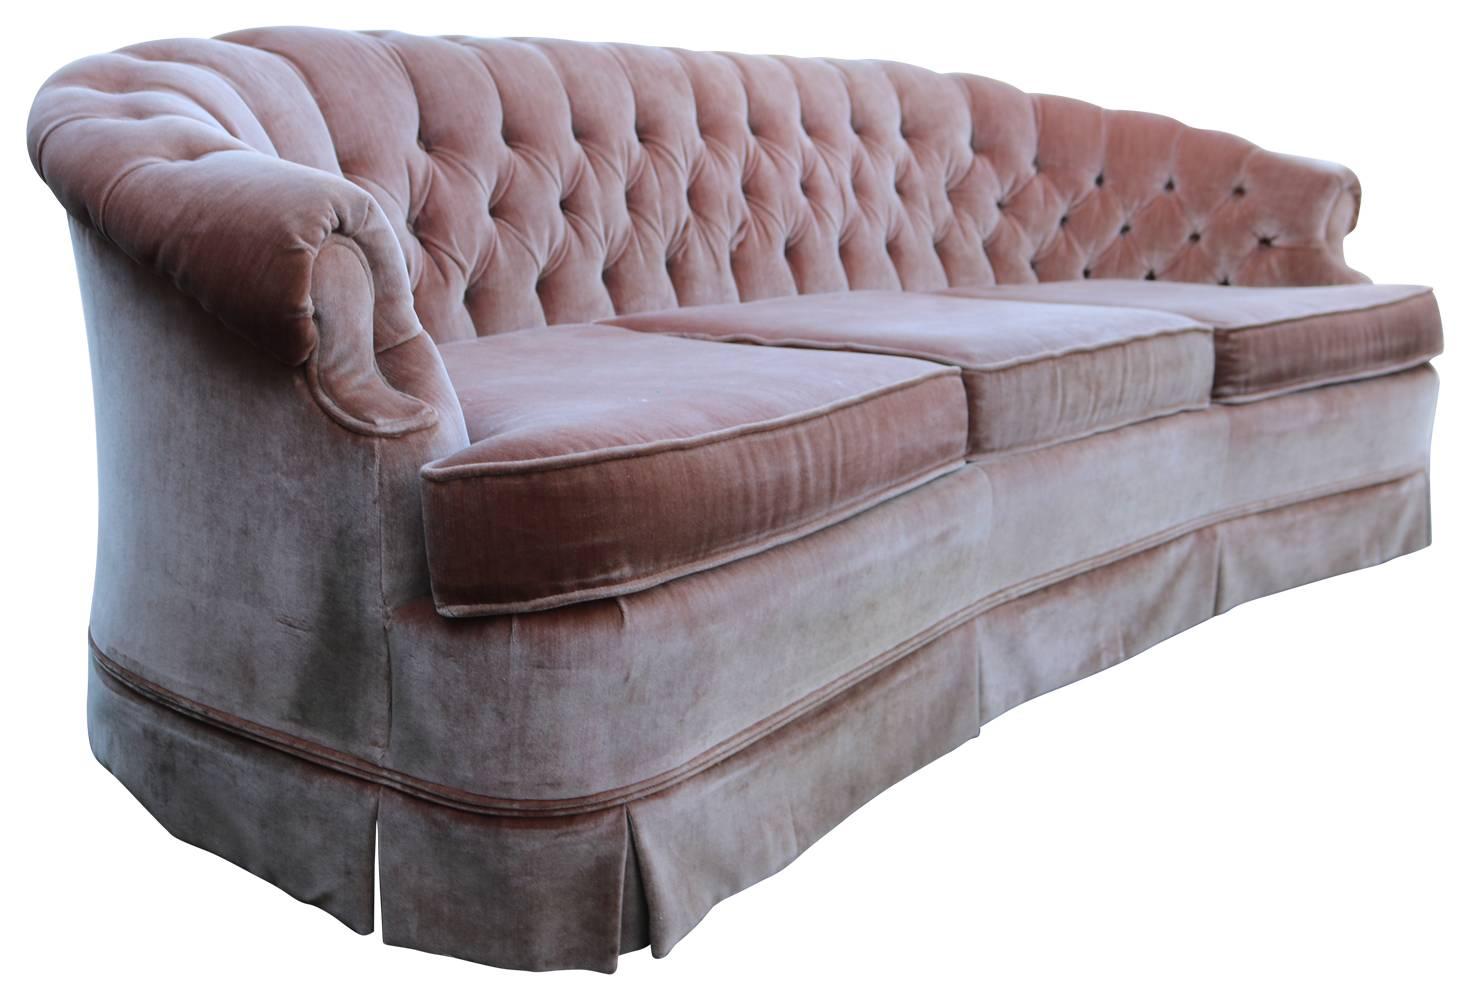 Gorgeous dusty rose pink vintage sofa with gently curved back and tufted detail. Fabric does show wear and some staining. A steam cleaning may alleviate most, but perfectionists will wish to reupholster.